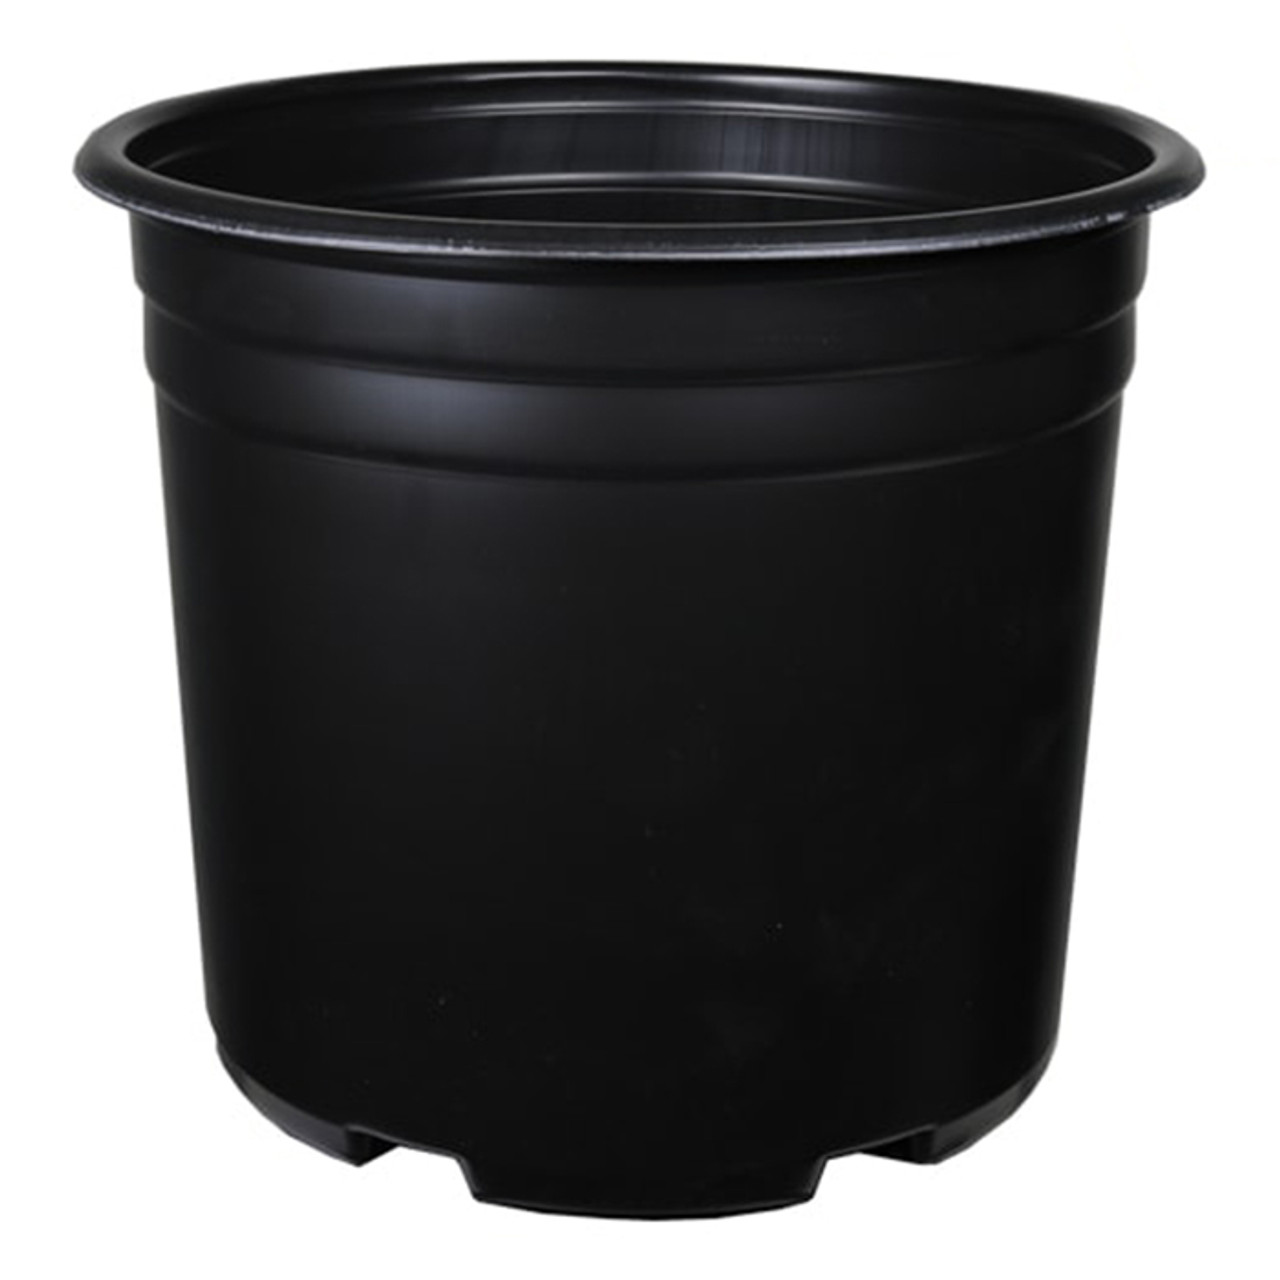 3 Gal Thermoformed Plastic Pot